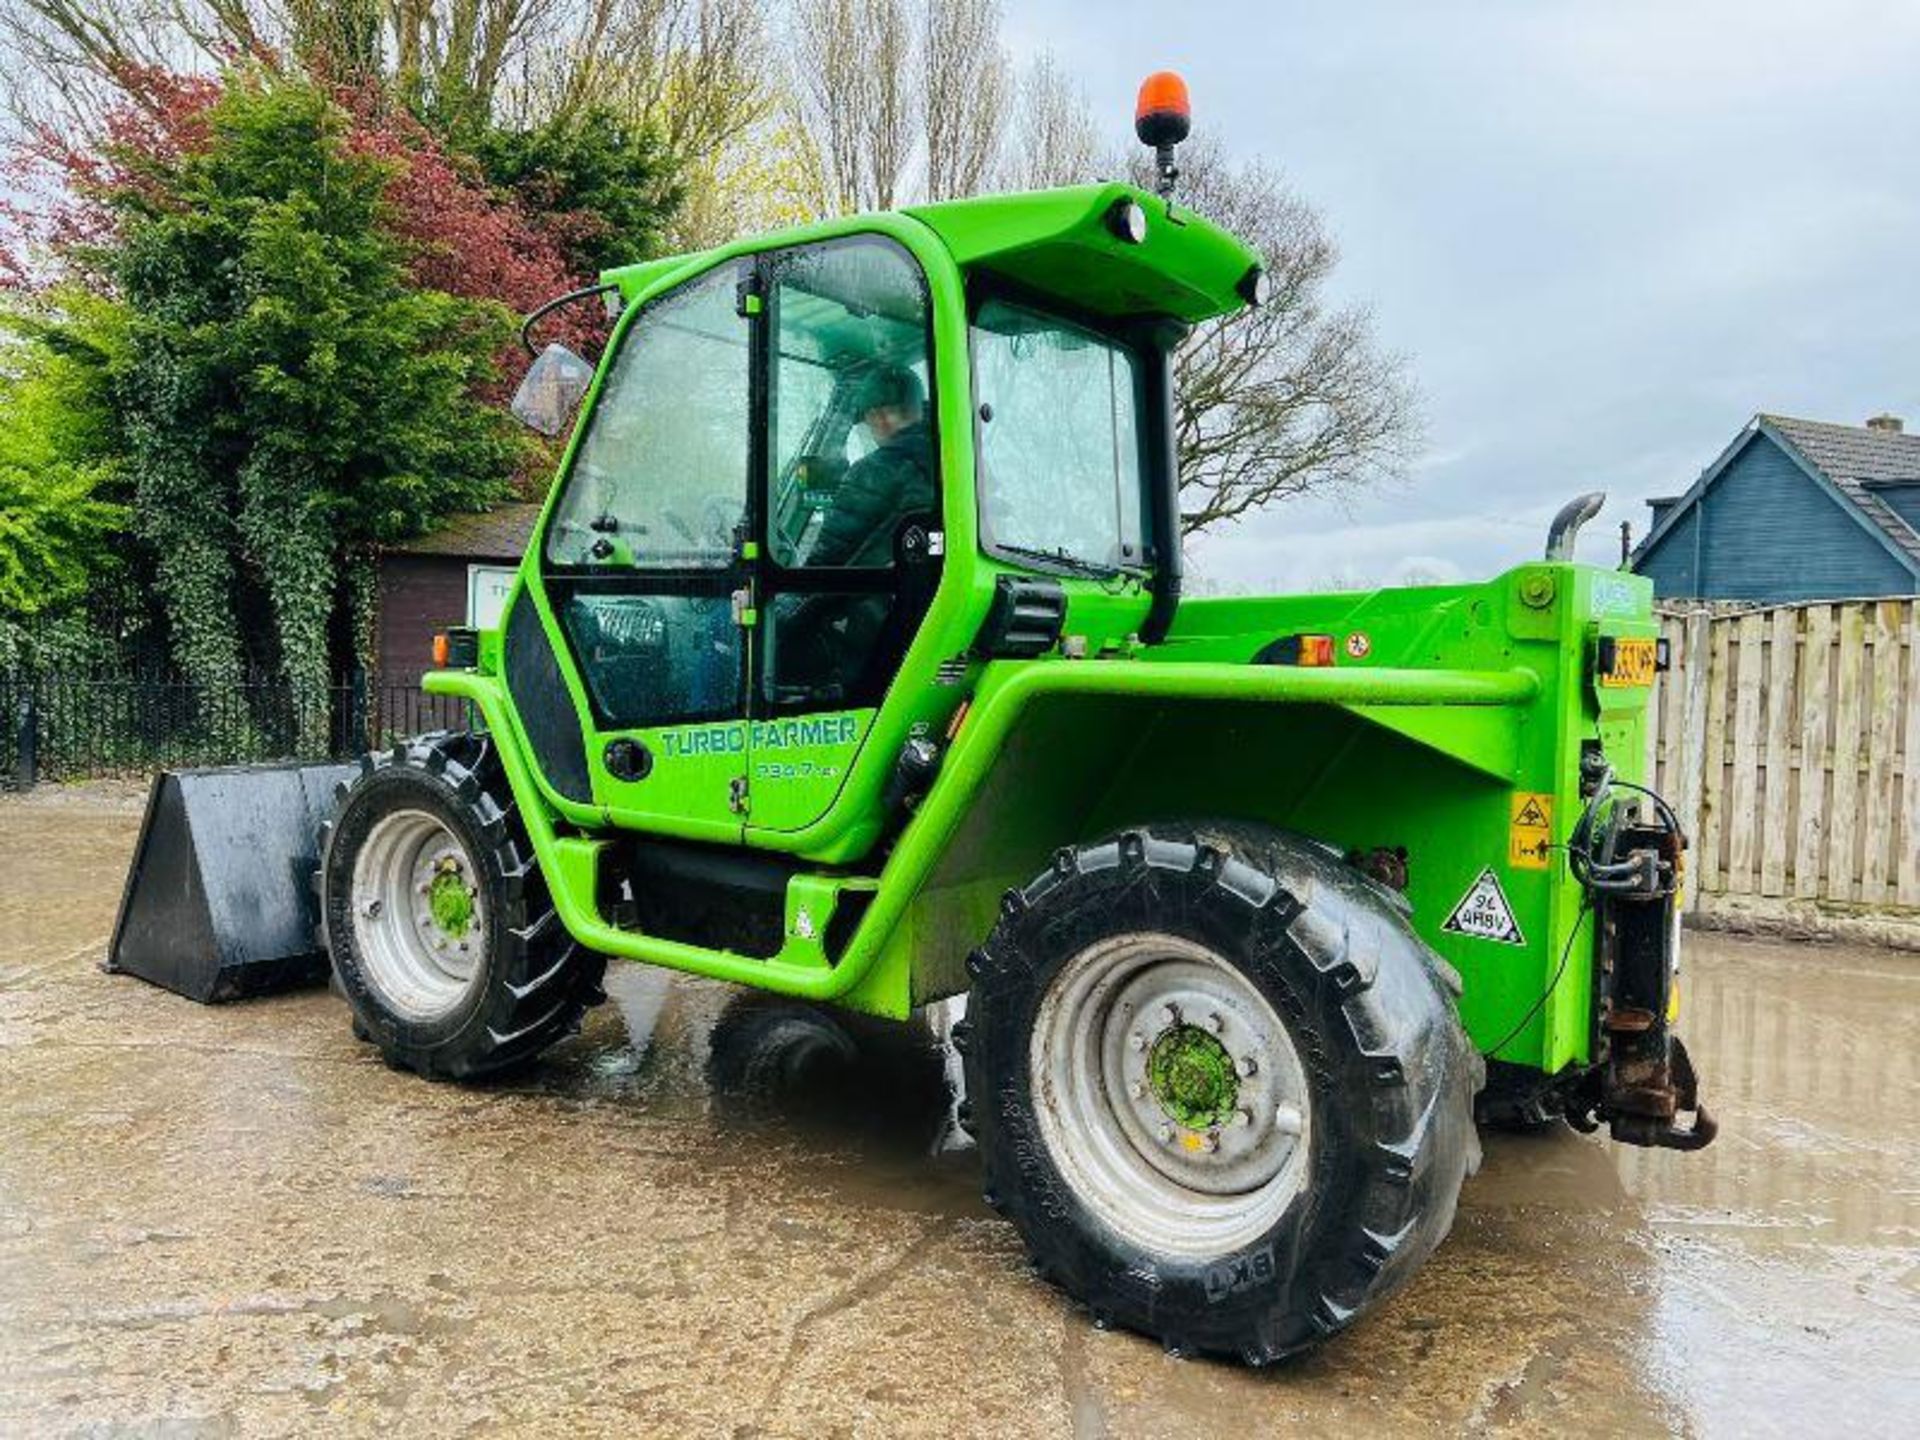 MERLO P34.7 4WD TELEHANDLER*YEAR 2013, AG SPEC* C/W PICK UP HITCH - Image 17 of 20